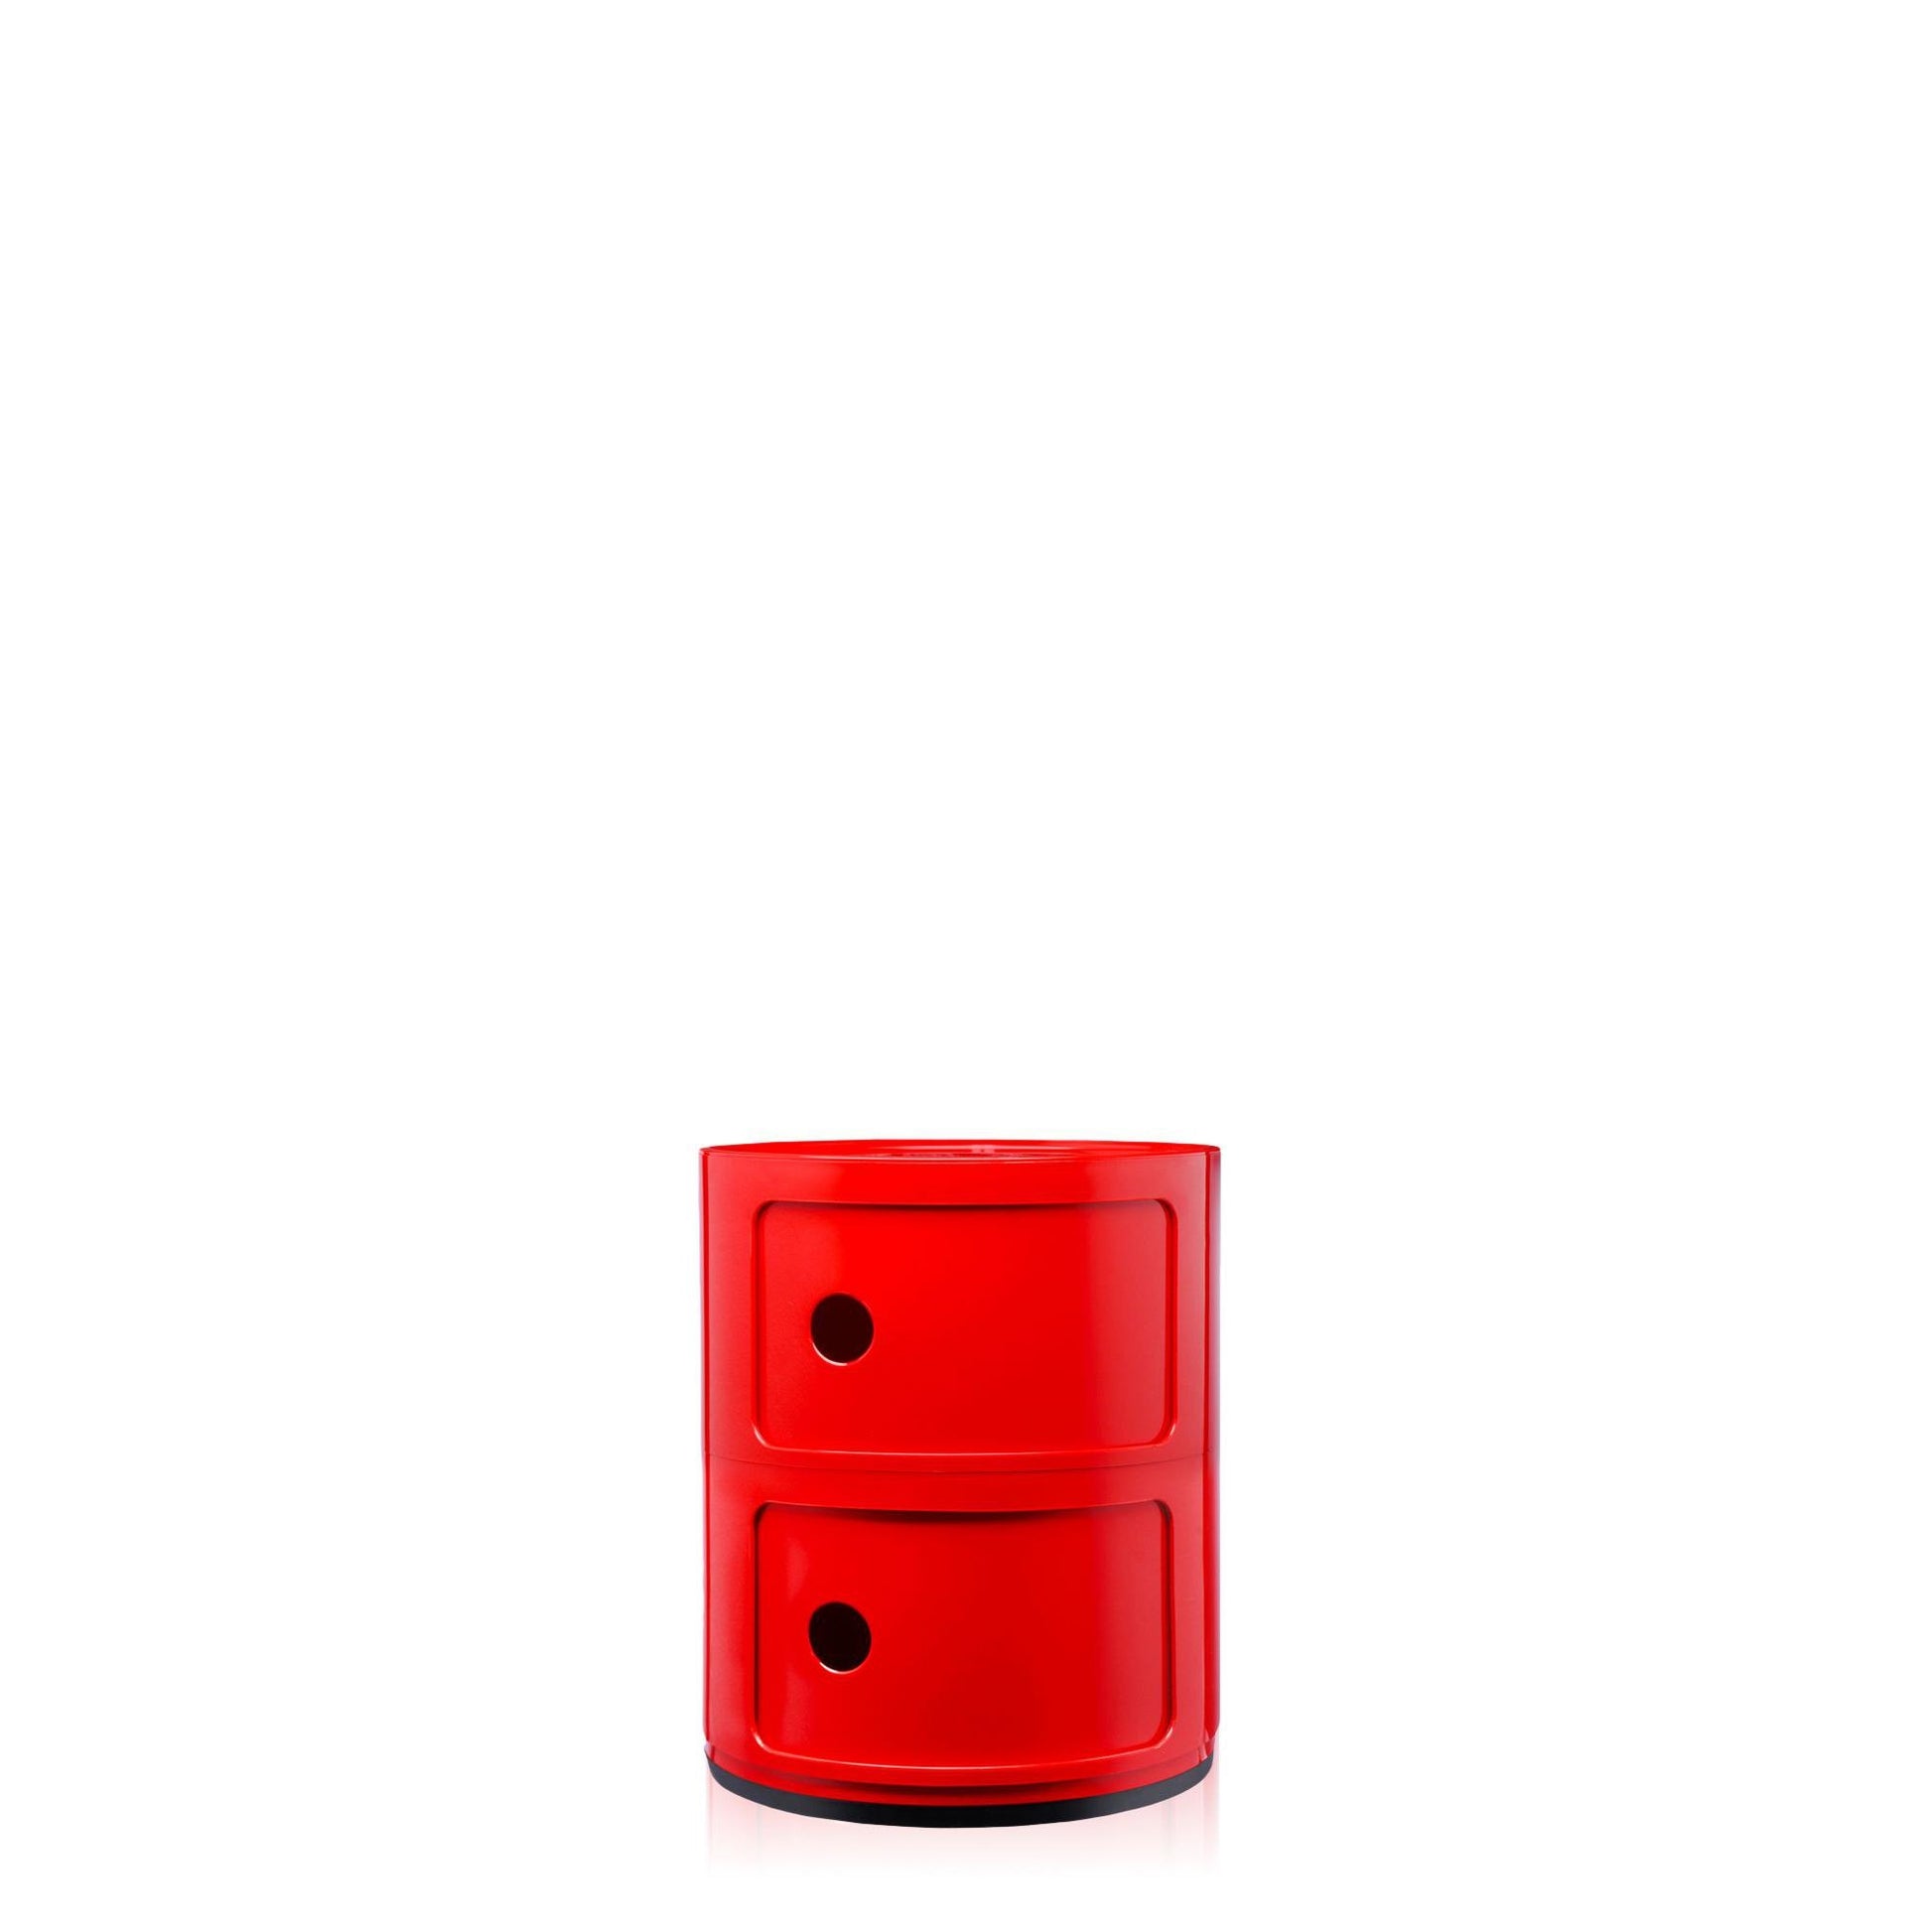 Componibili 2 Cabinet by Kartell #Red